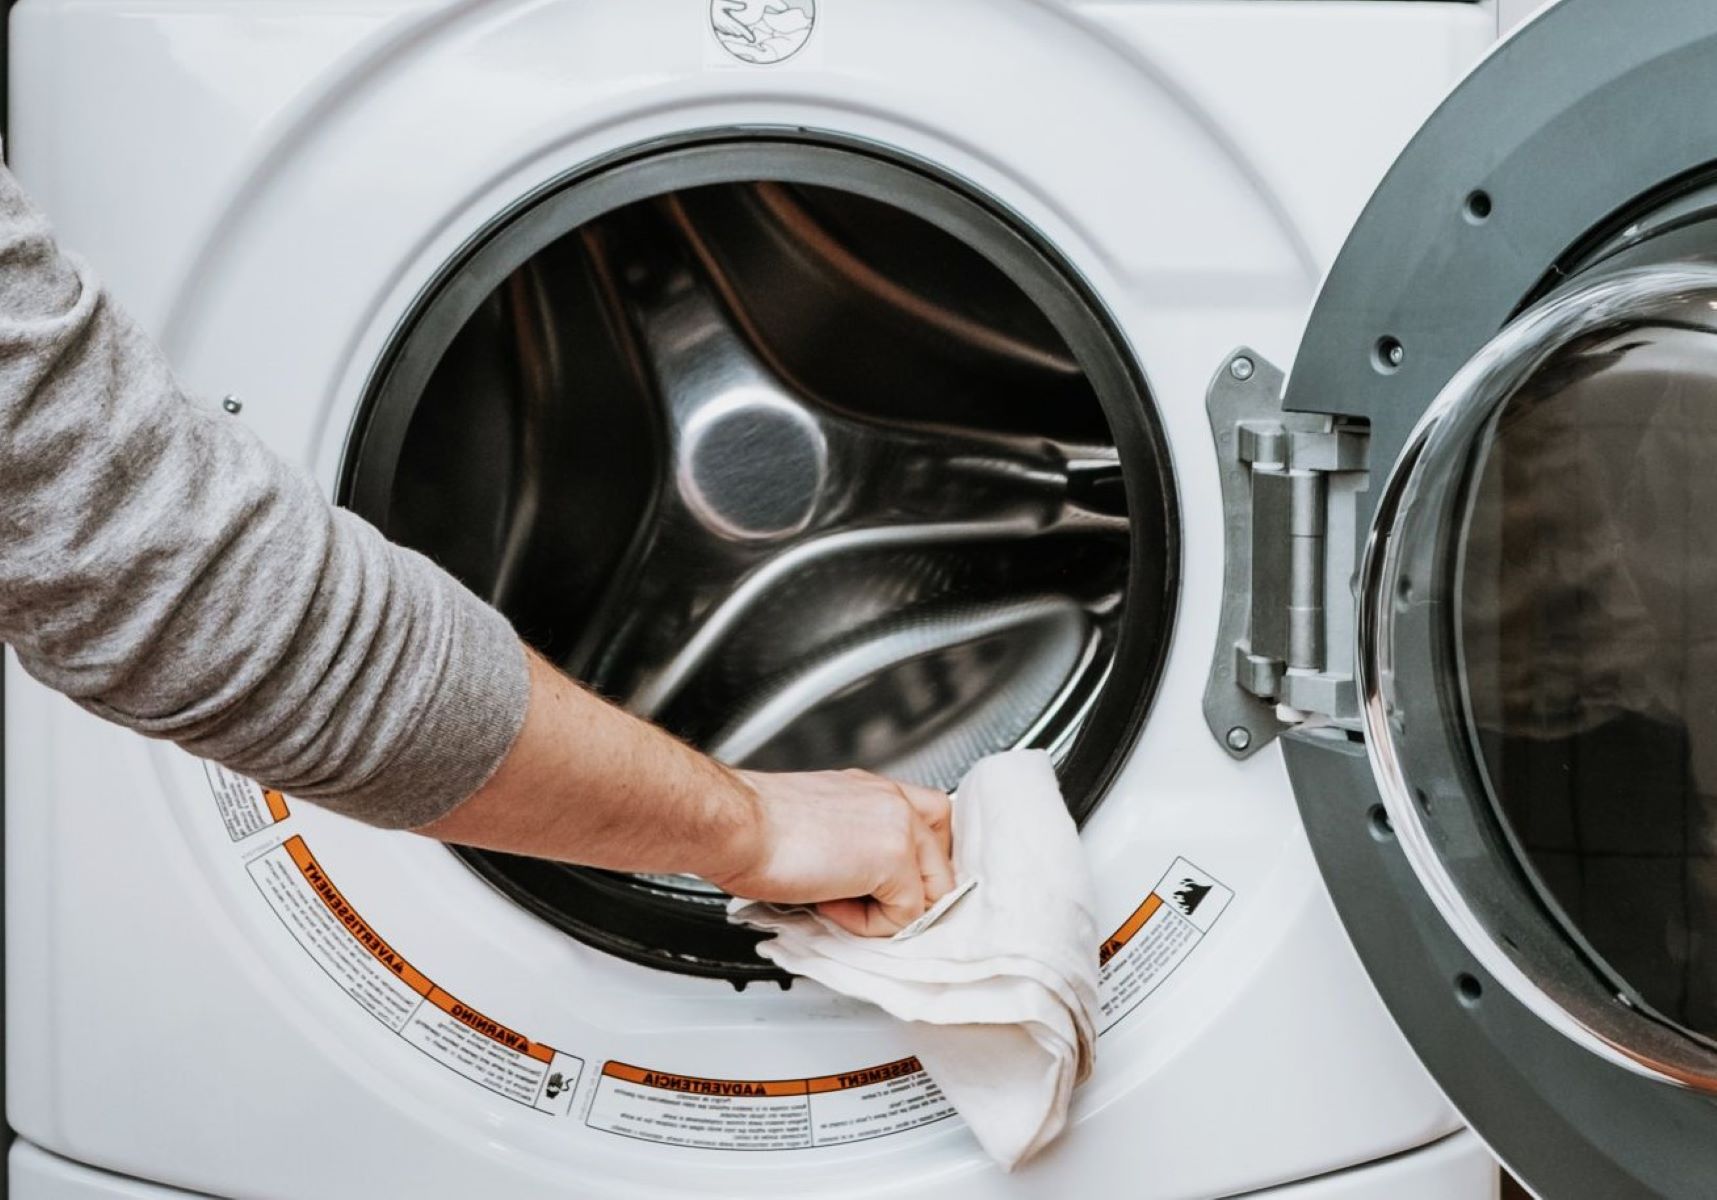 How To Get Rust Out Of A Washing Machine